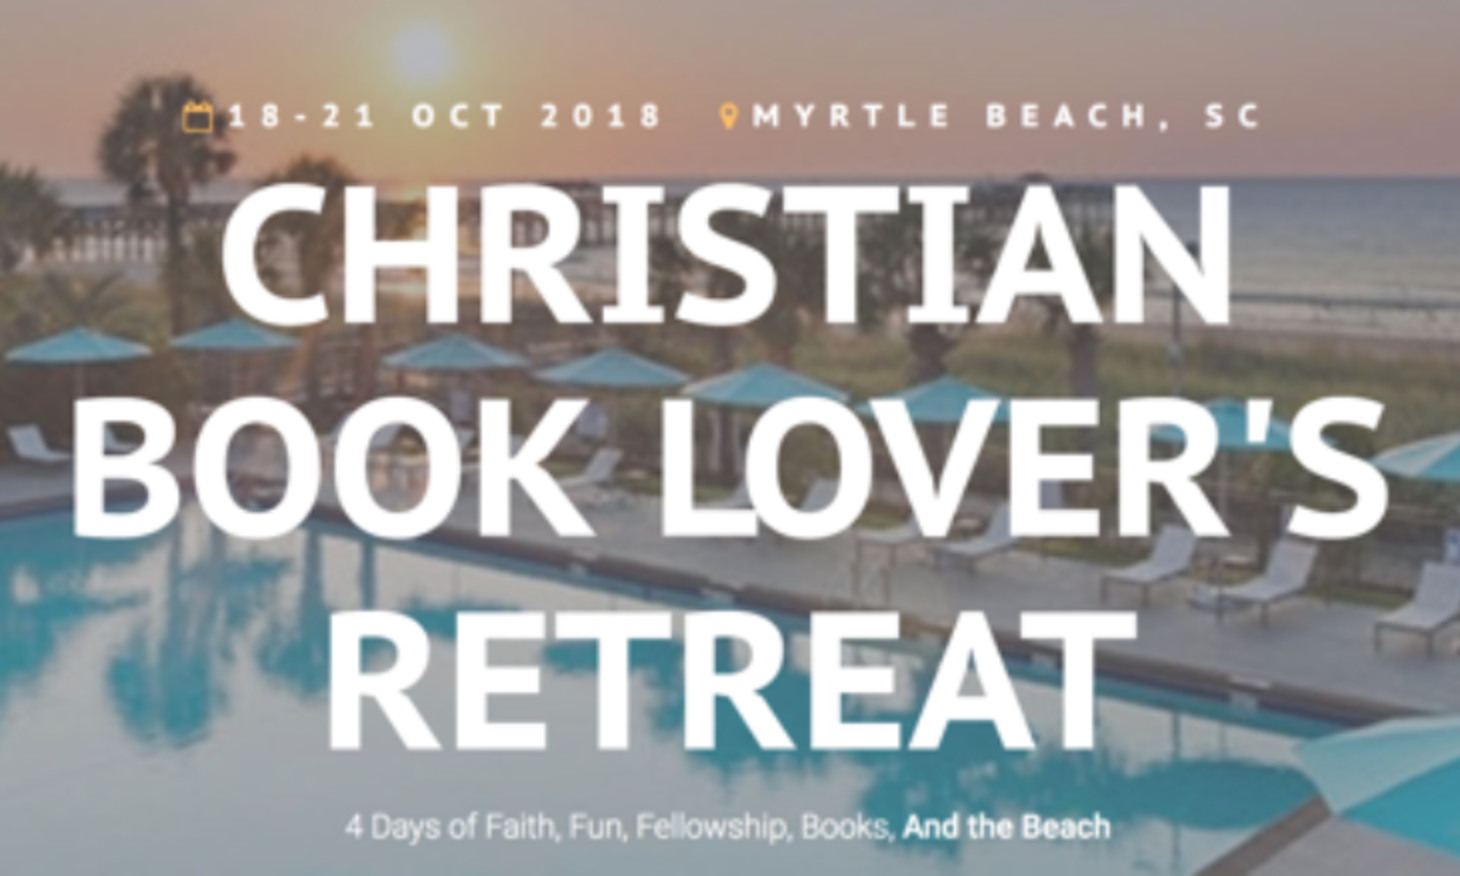 EVENT: Christian Book Lovers Retreat